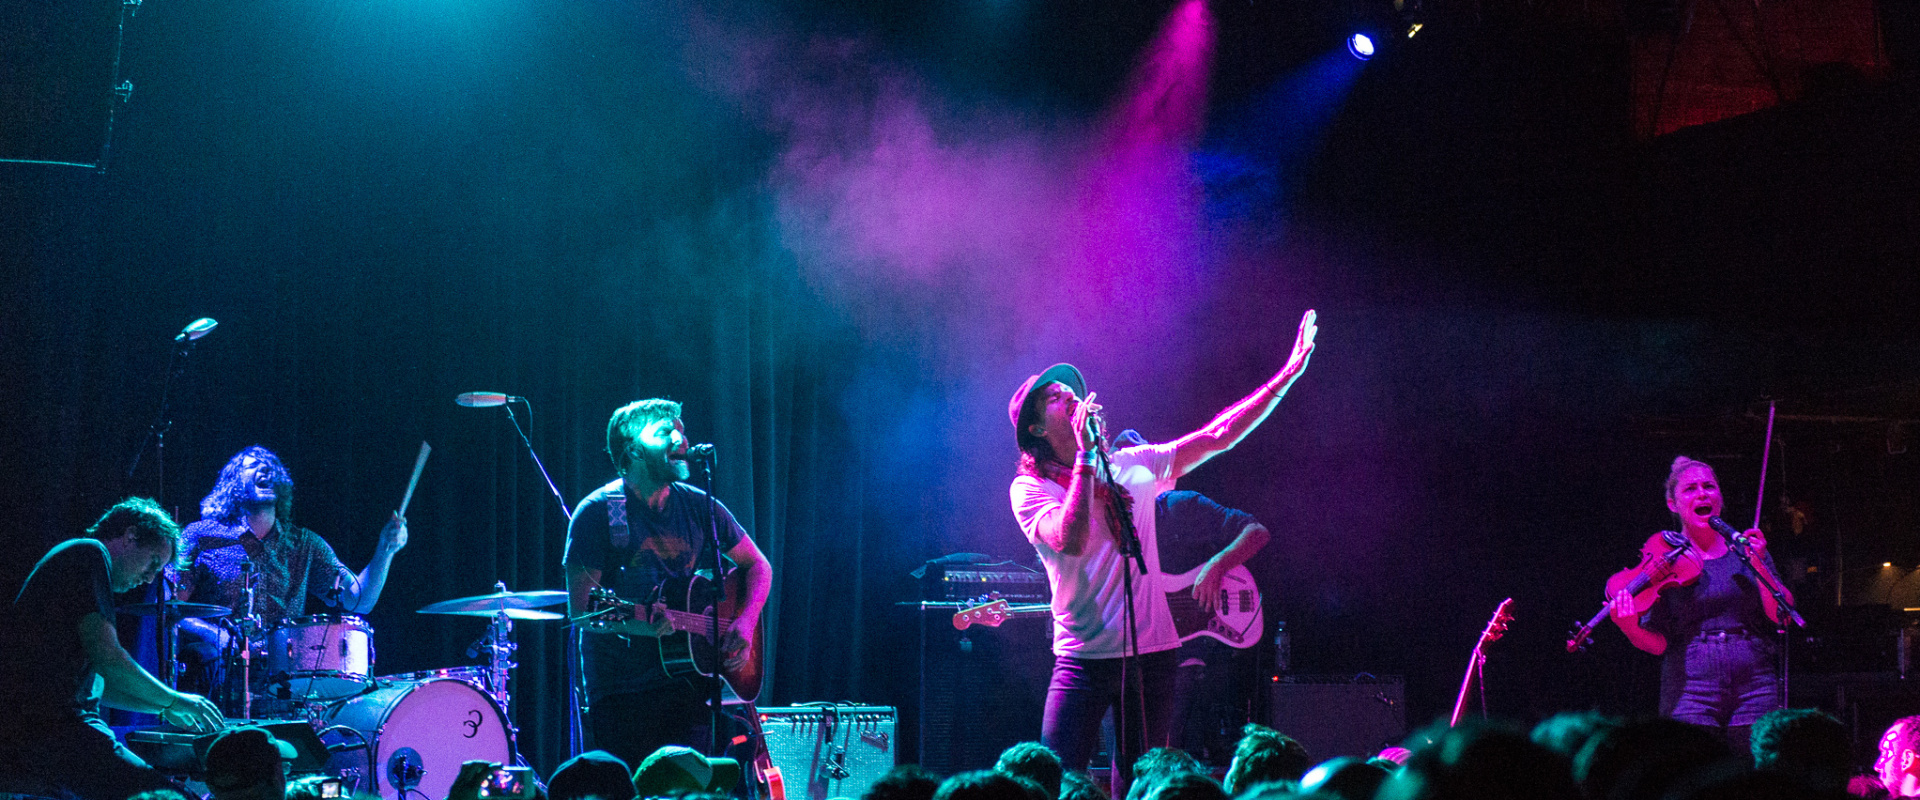 15 of the Best Music Venues in Brooklyn, NY